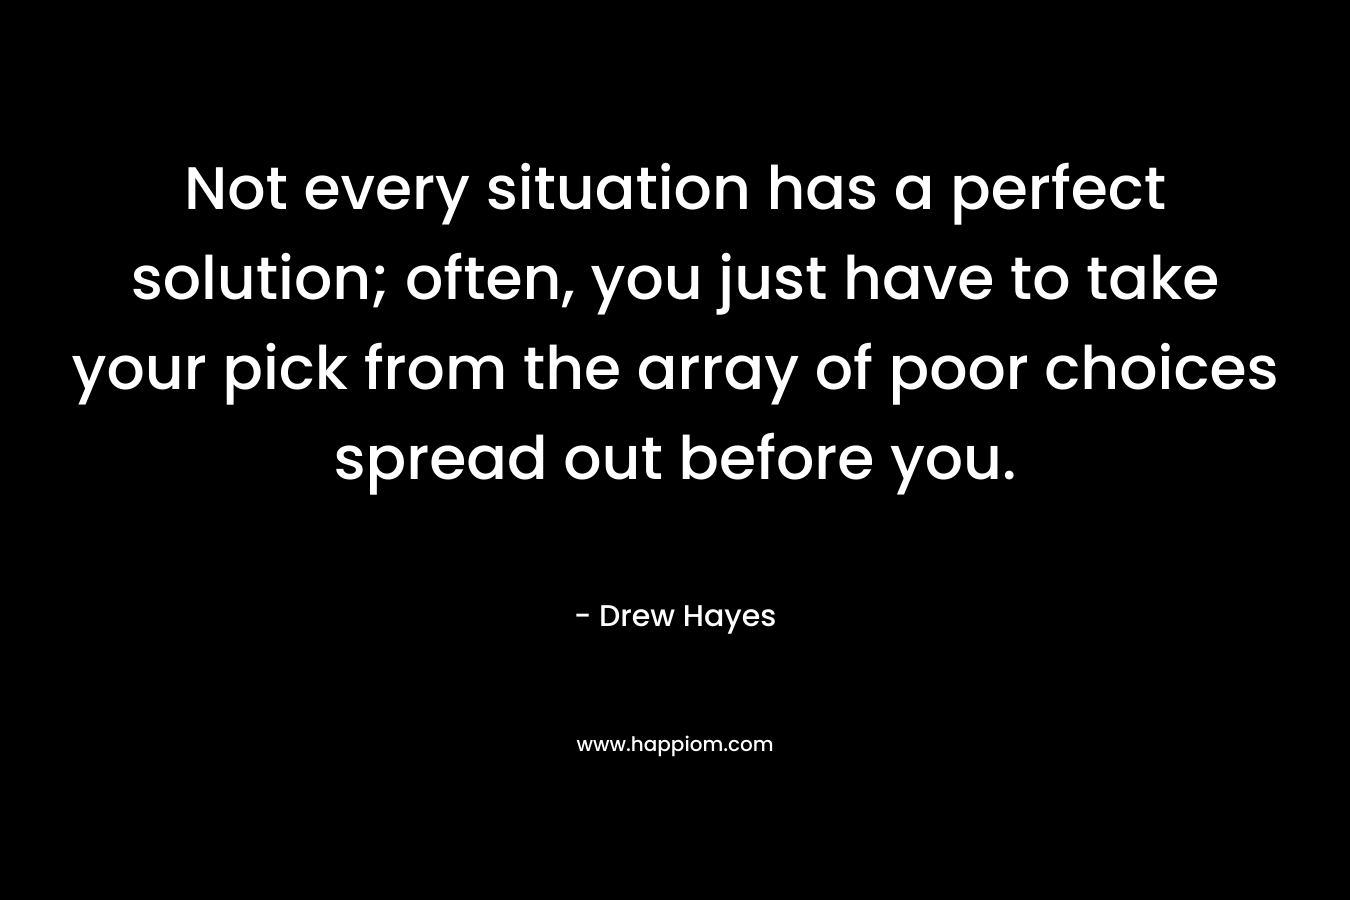 Not every situation has a perfect solution; often, you just have to take your pick from the array of poor choices spread out before you.